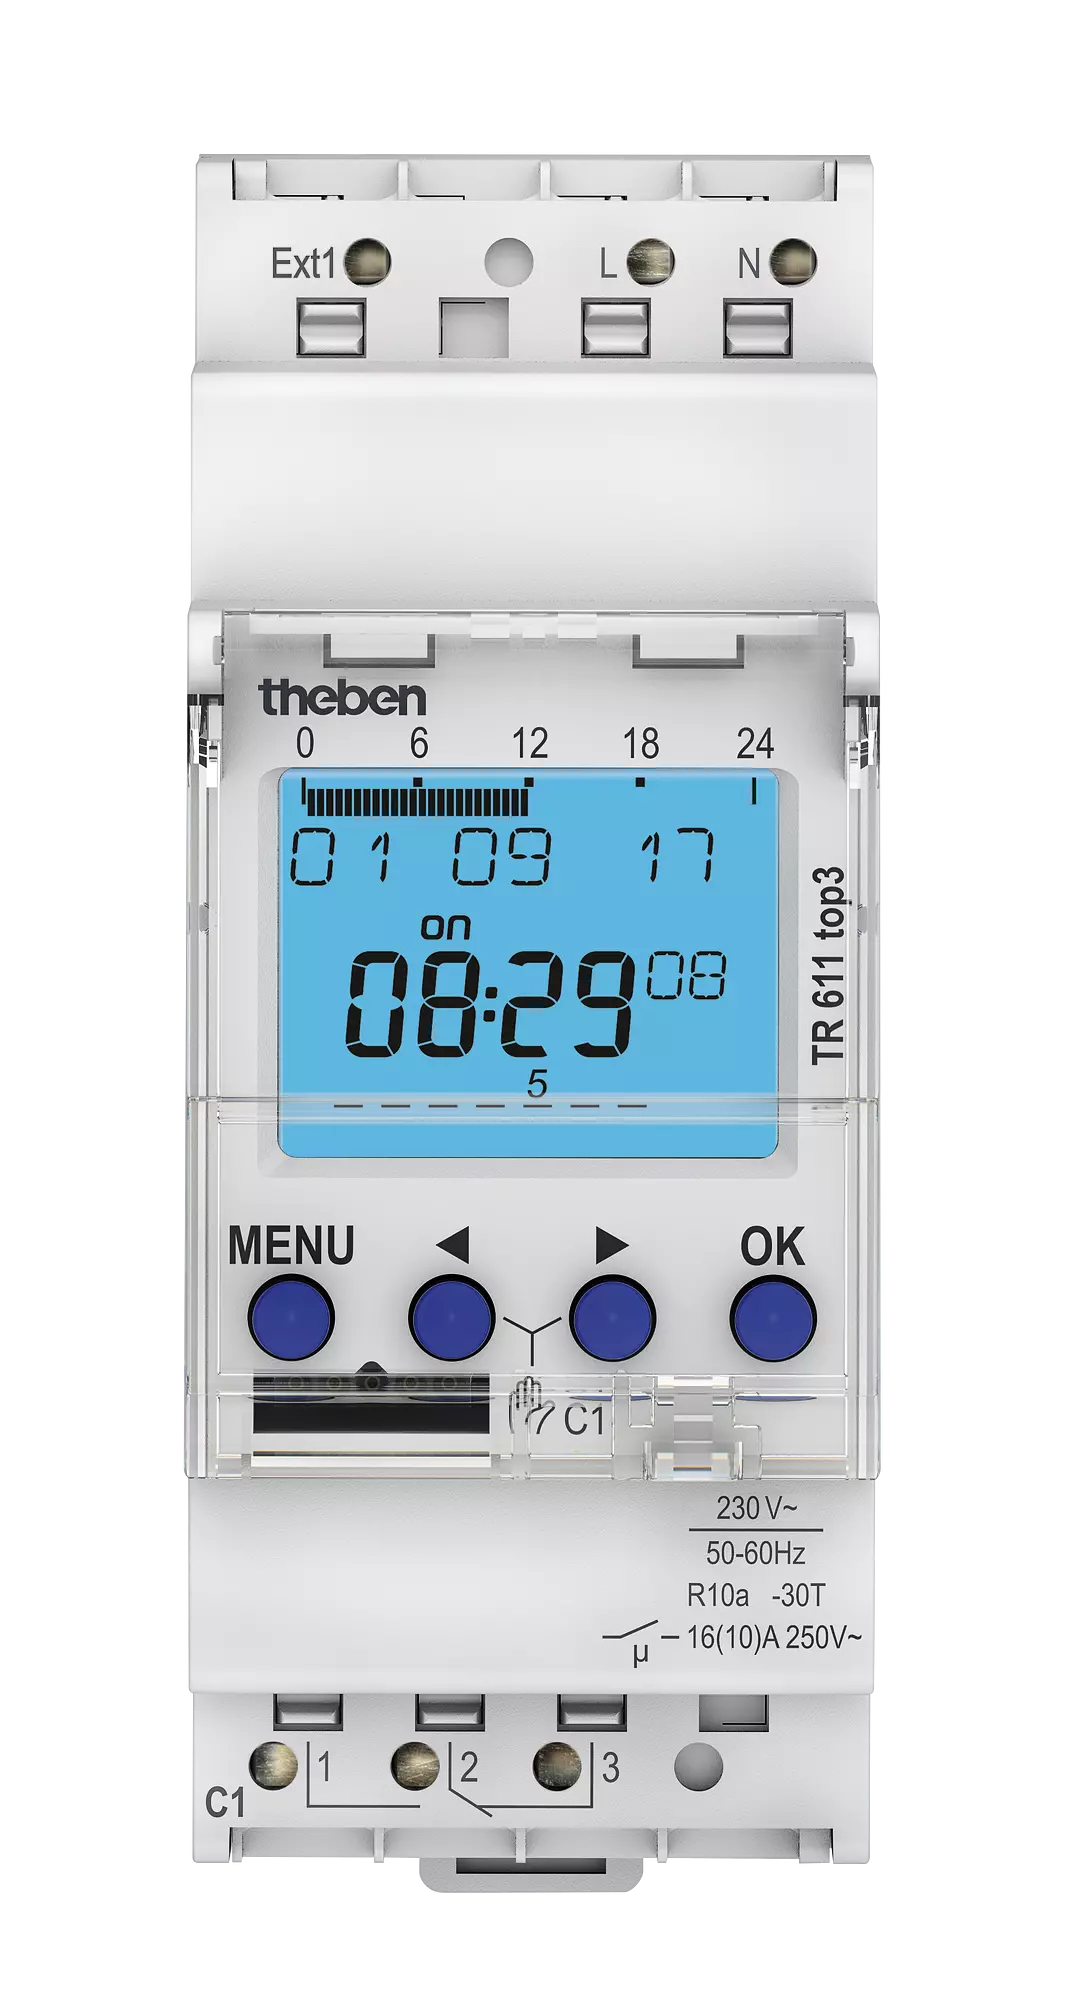 nudler matrix Quagmire TR 611 top3 | Weekly program | DIN rail | Digital time switches | Time and  light control | Theben